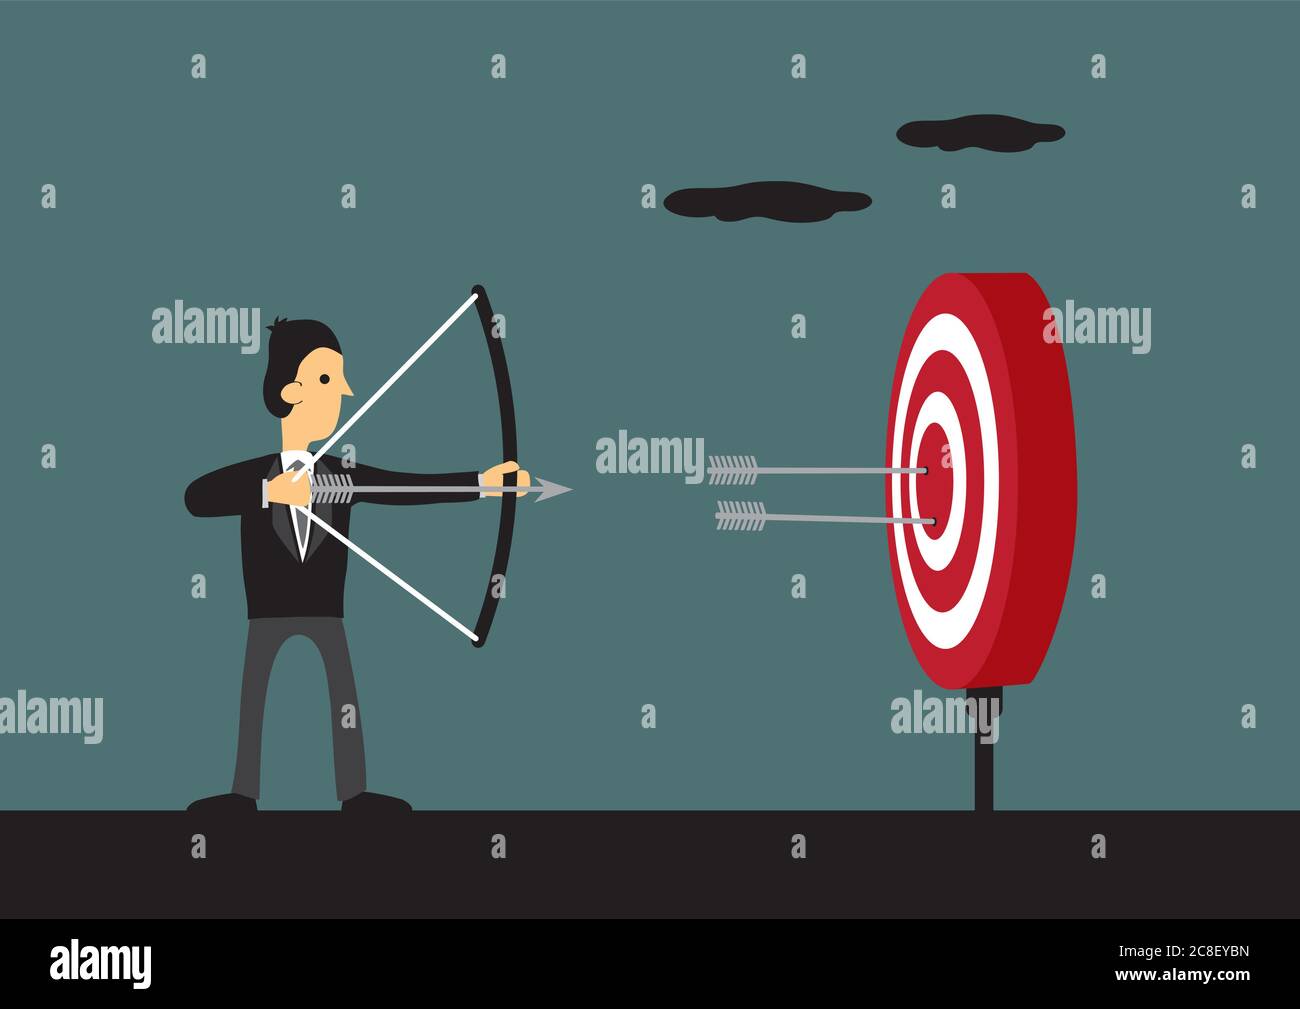 Cartoon man holding bow and arrow aiming at center of target with two arrows on bulls eye. Vector illustration for business goal and success. Stock Vector